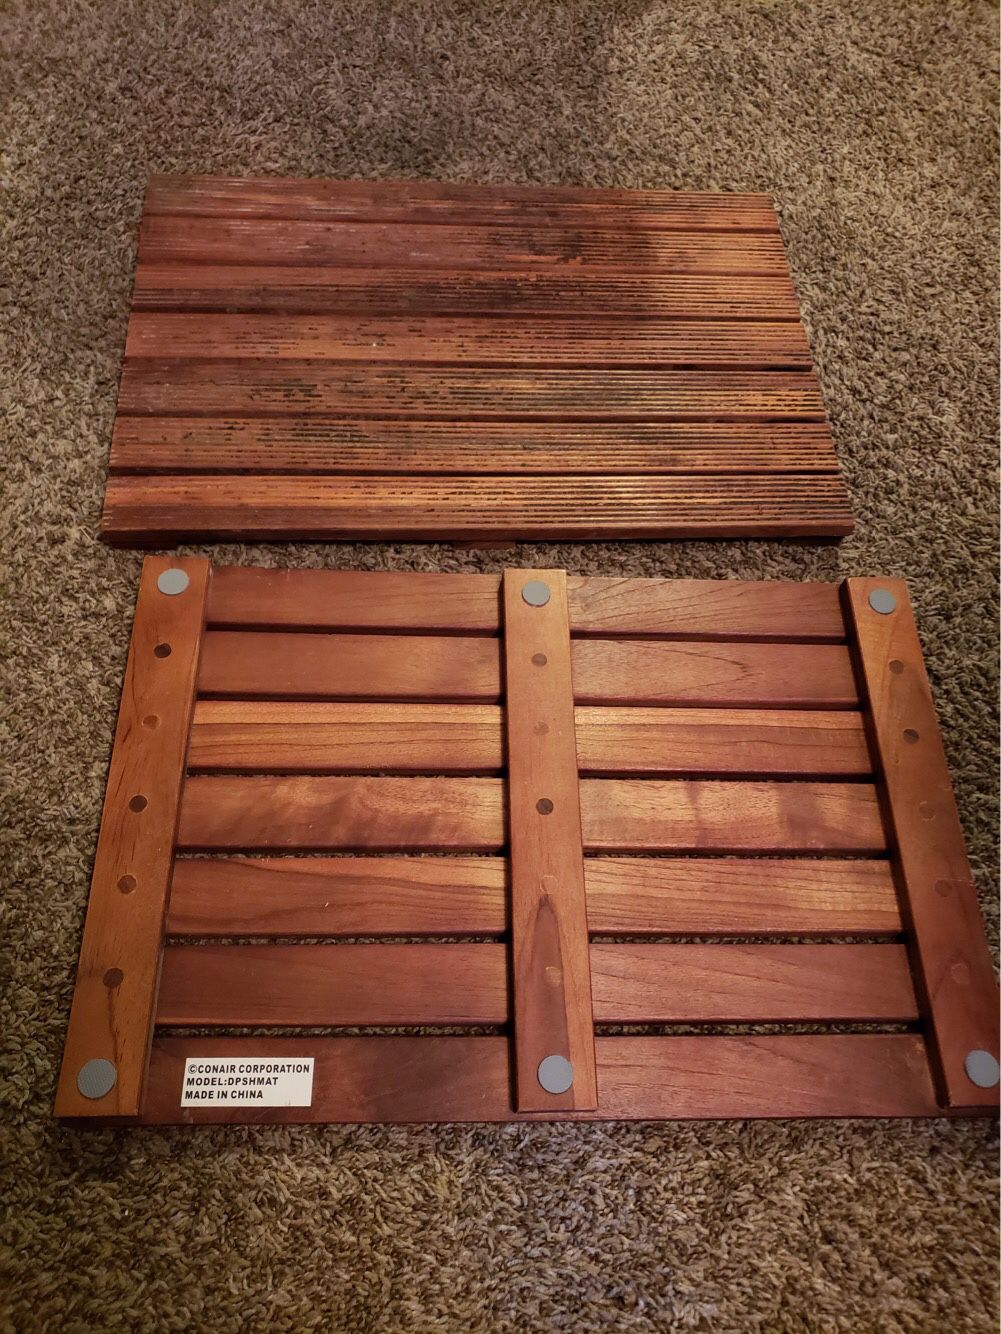 2 wooden spa and sauna footing or sitting boards